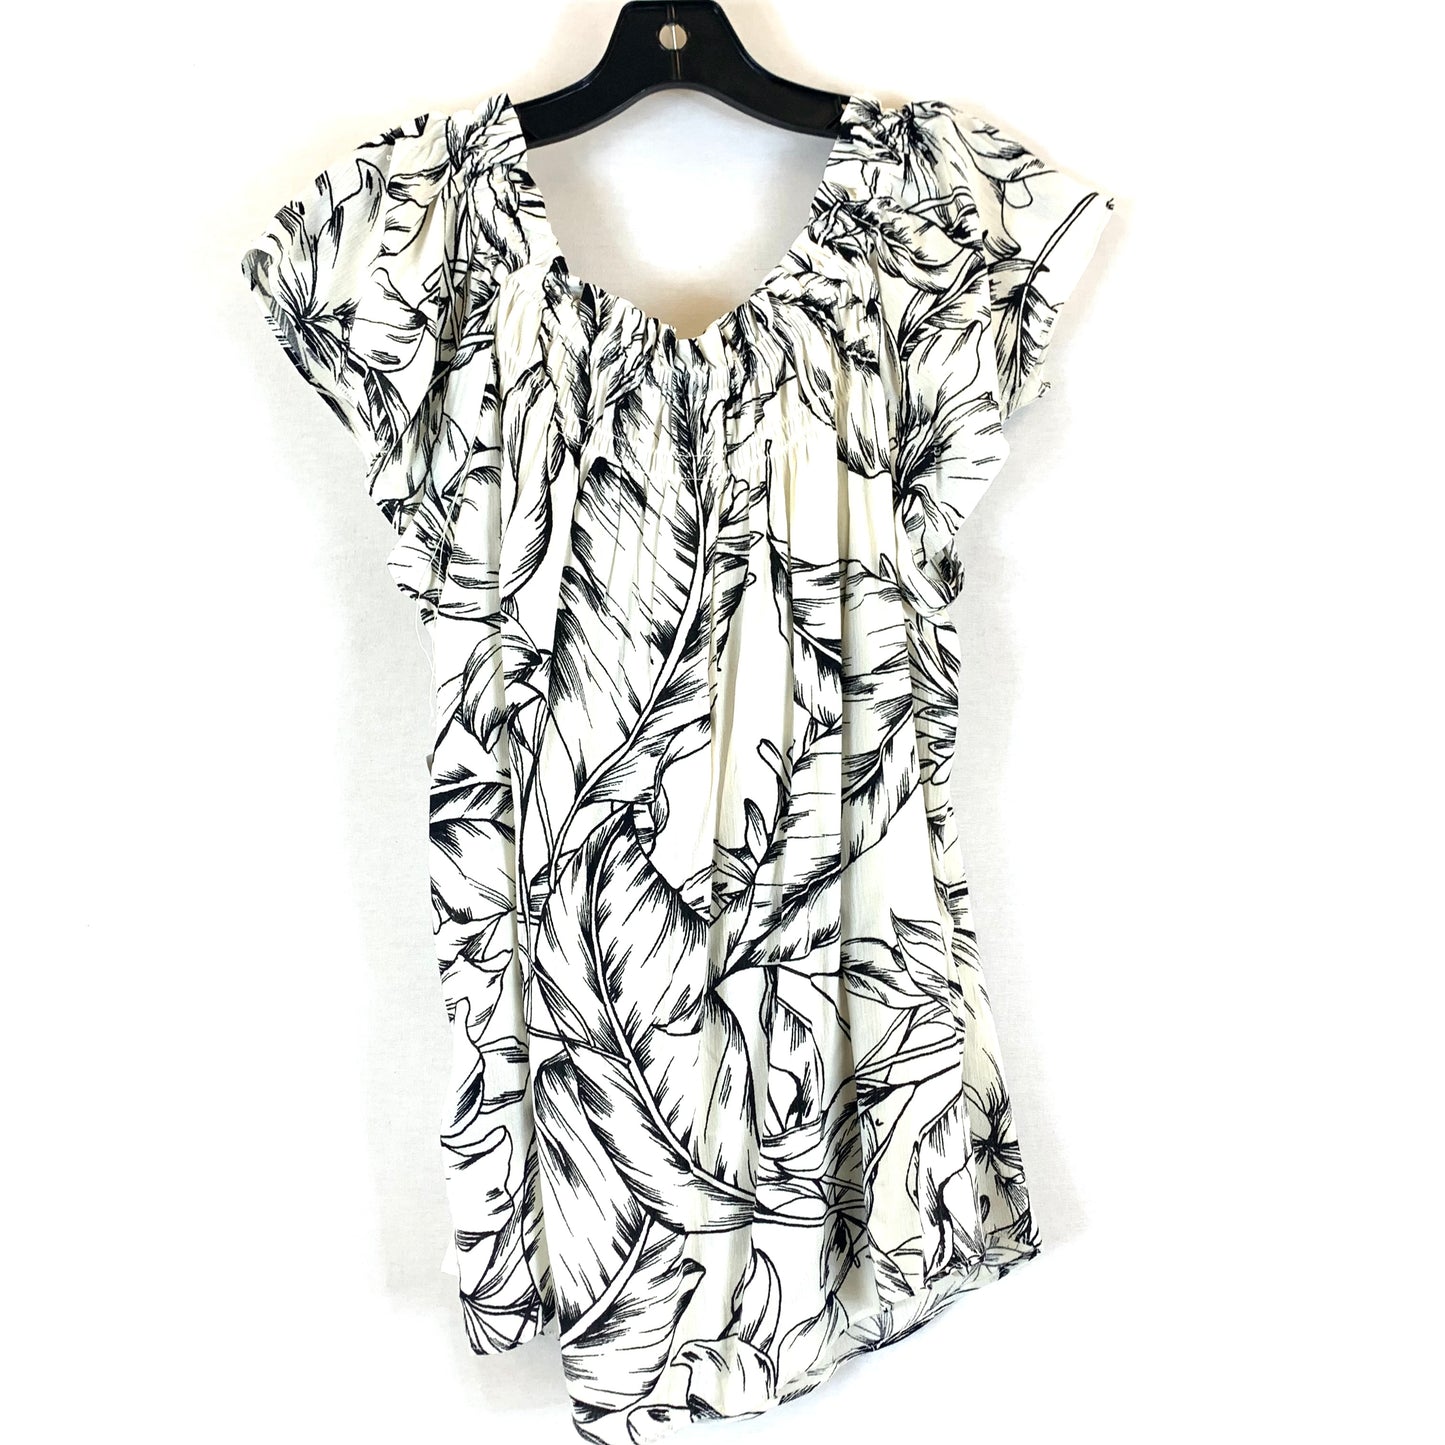 Top Short Sleeve By Rose And Olive  Size: L